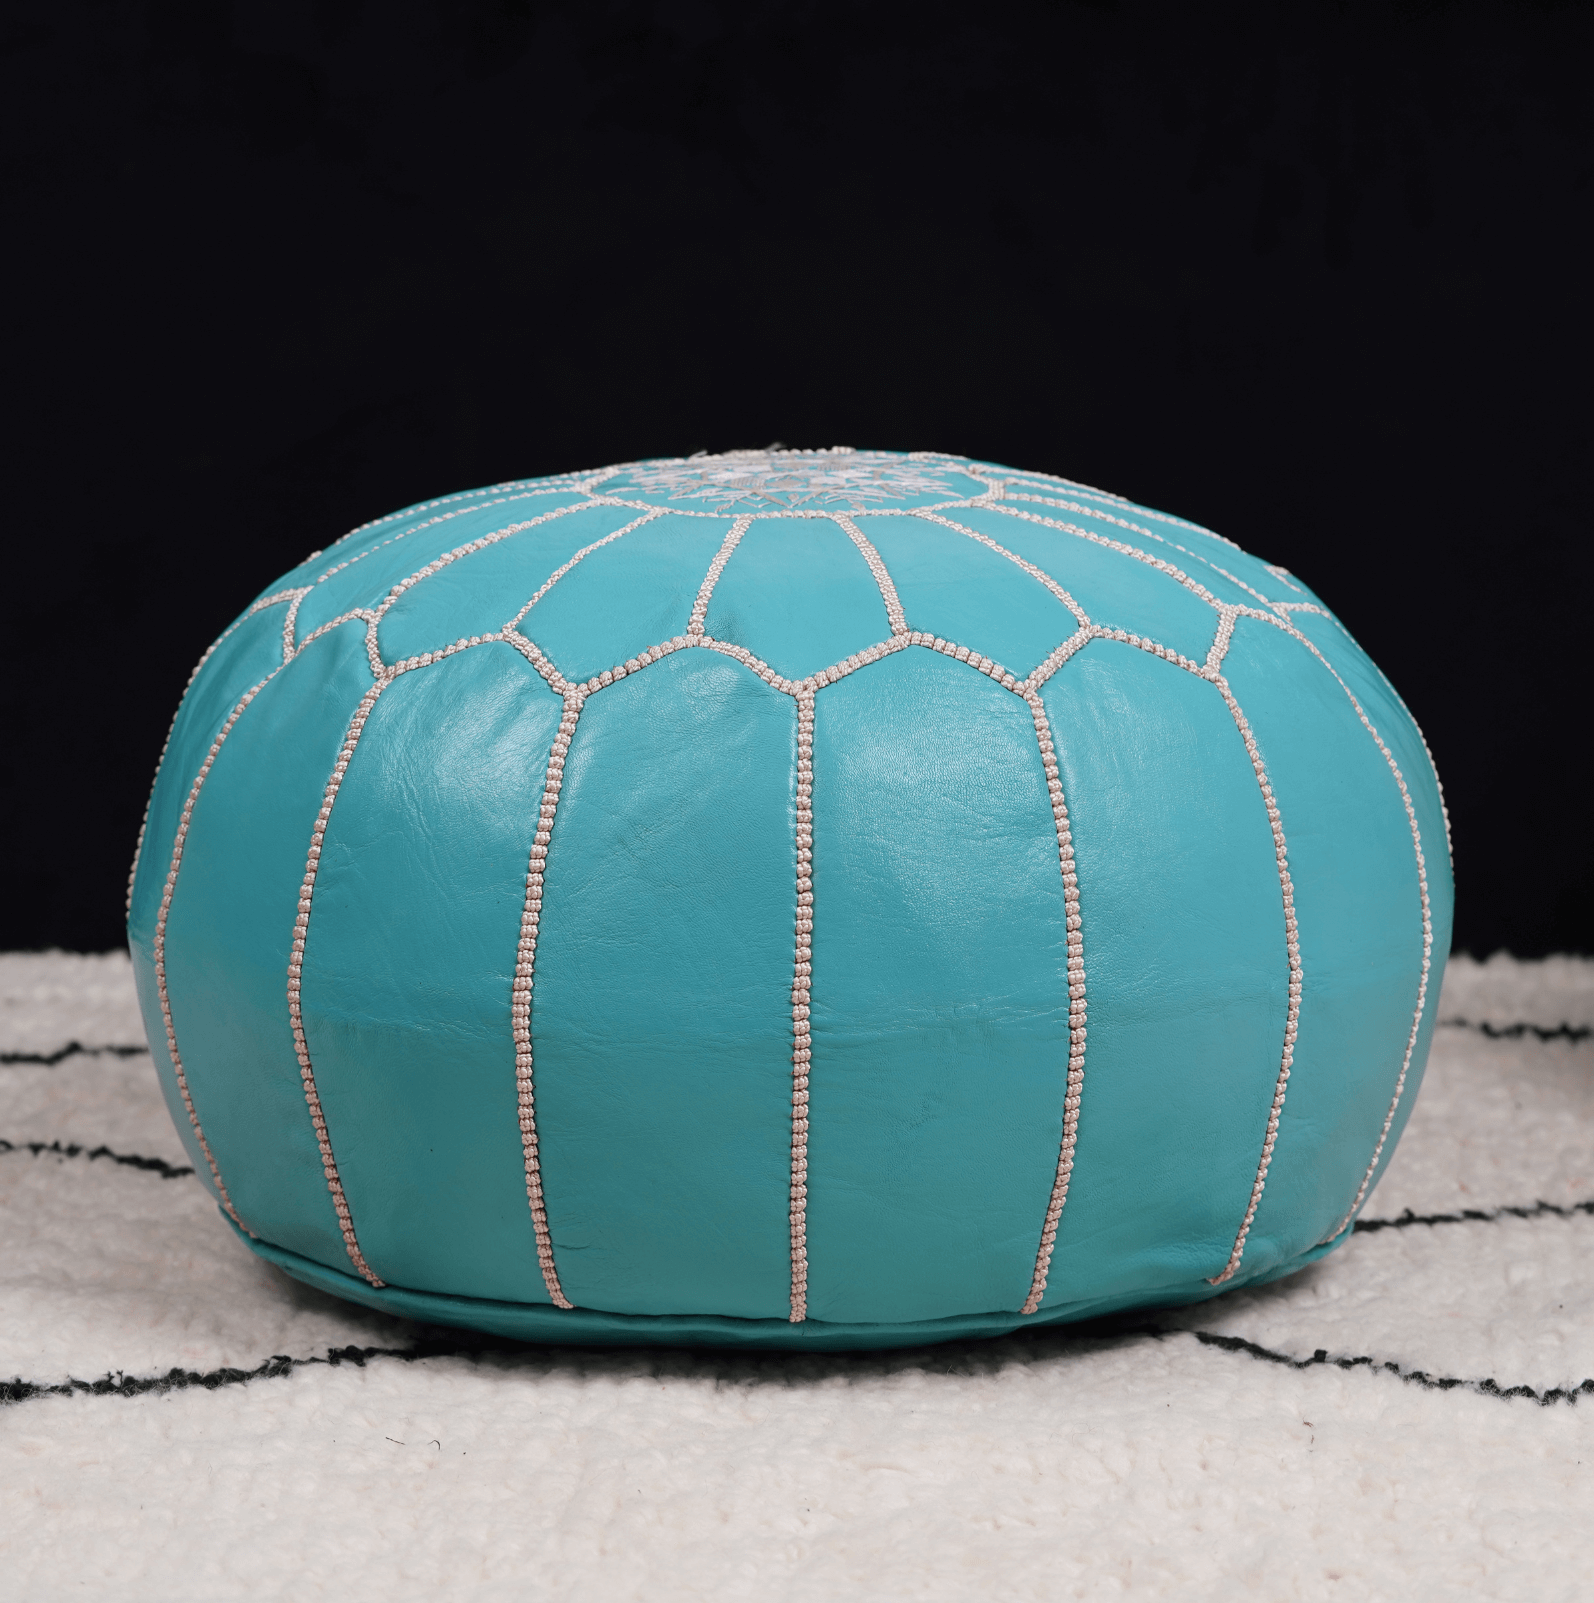 SKY BLUE MOROCCAN LEATHER POUF